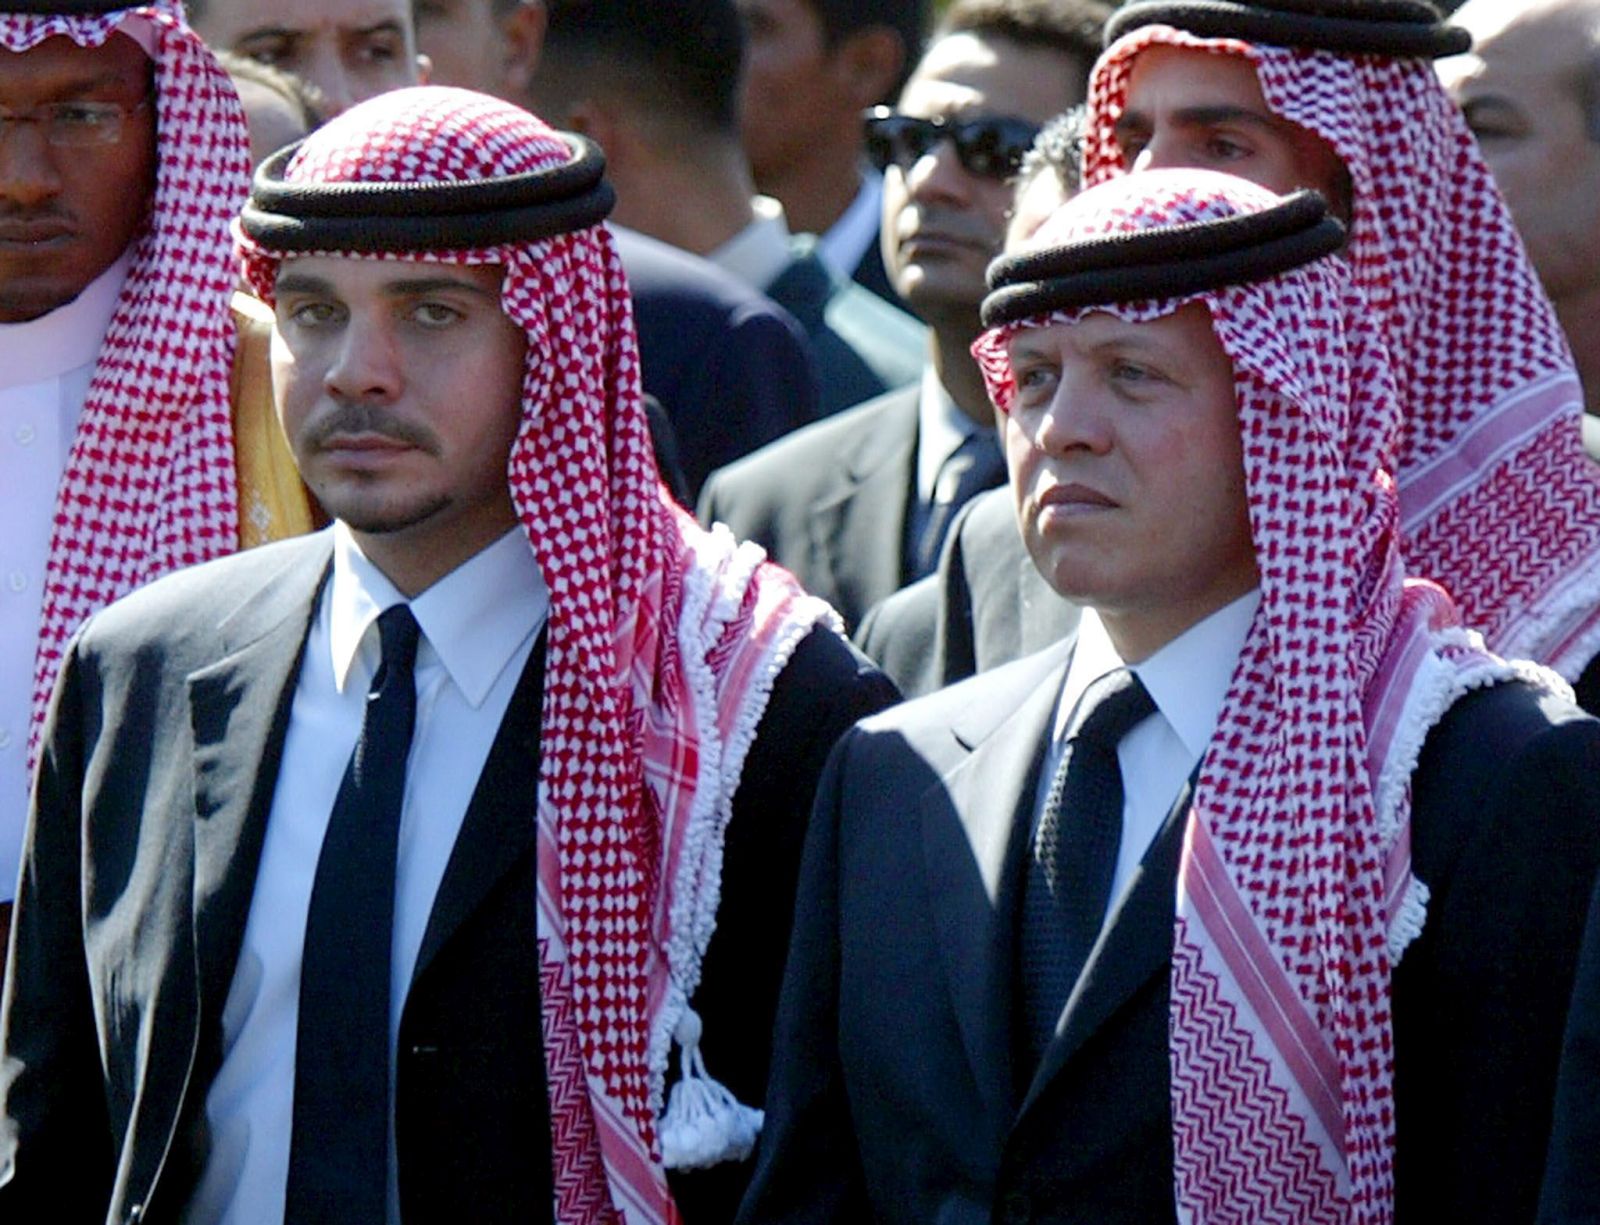 epa09116137 (FILE) - Former Jordanian Crown Prince Hamzah bin Al Hussein (L) with his half brother King Abullah of Jordan (R) as they walk together in the funeral procession of Palestinian President Yasser Arafat in Cairo, Egypt, 12 November 2004 (reissued on 04 April 2021), a day after several senior figures were detained and the half-brother of King Abdullah II prince Hamzah bin Hussein said that he was put under house arrest. Security agencies, through long-term and comprehensive joint investigations have been following activities and movements by His Royal Highness Prince Hamzah bin Al Hussein and others, said Deputy Prime Minister and Minister of Foreign Affairs and Expatriates Ayman Safadi in a press conference on 04 April.  EPA/MIKE NELSON *** Local Caption *** 00320818